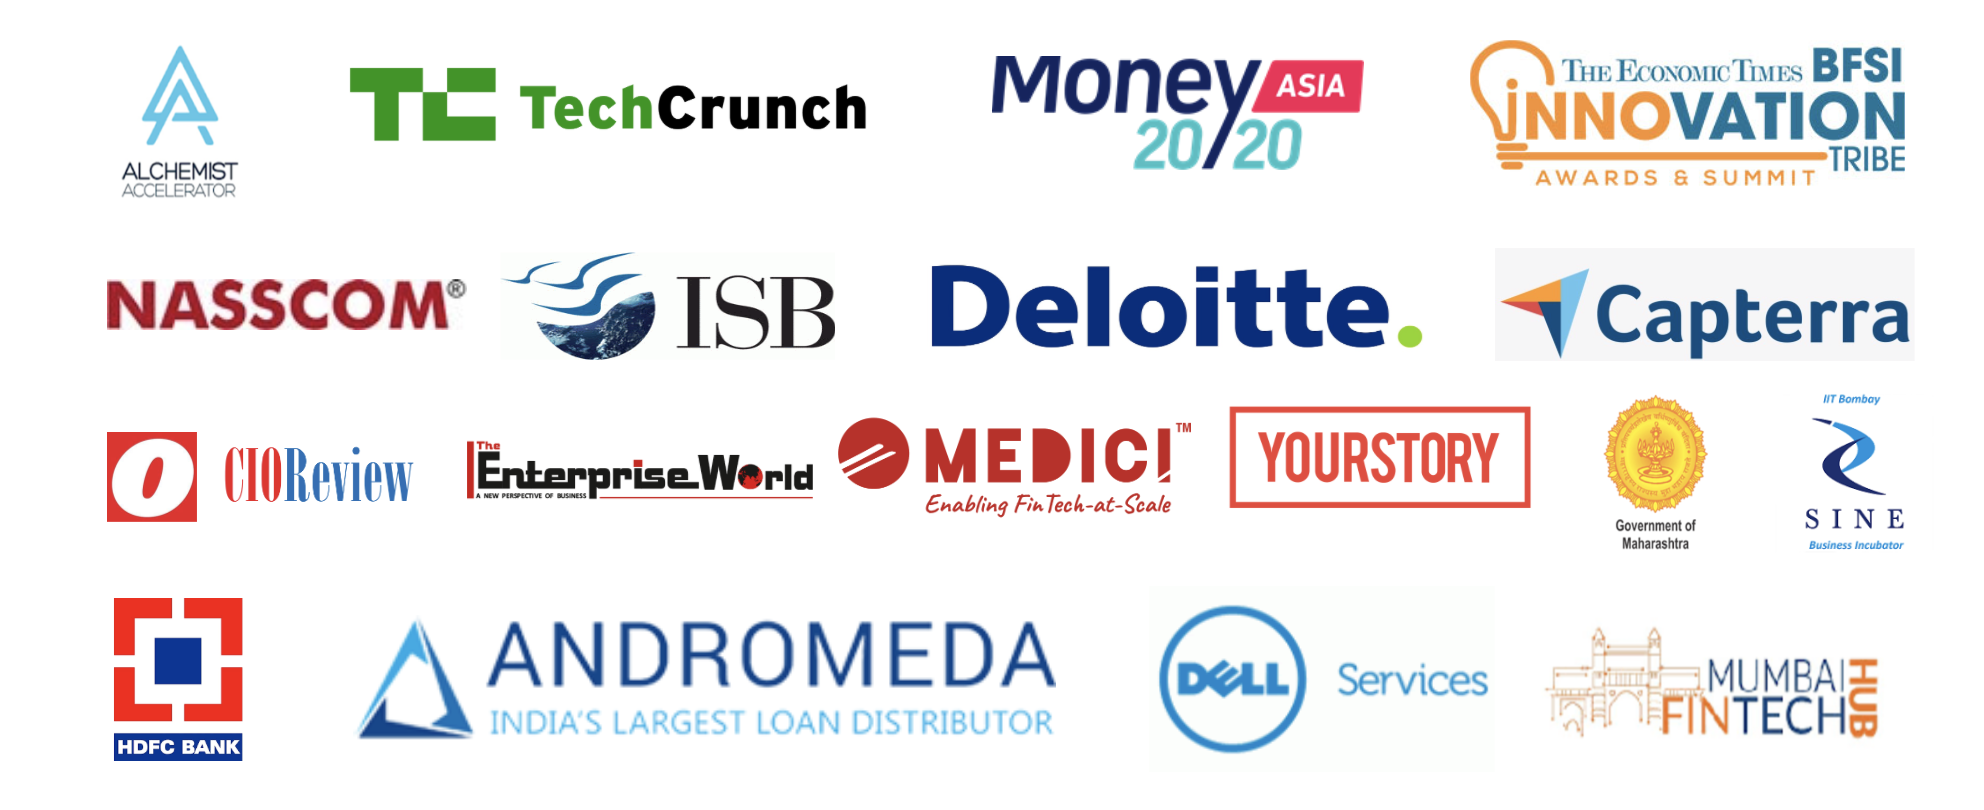 Crelytics is trusted by major brands across the globe